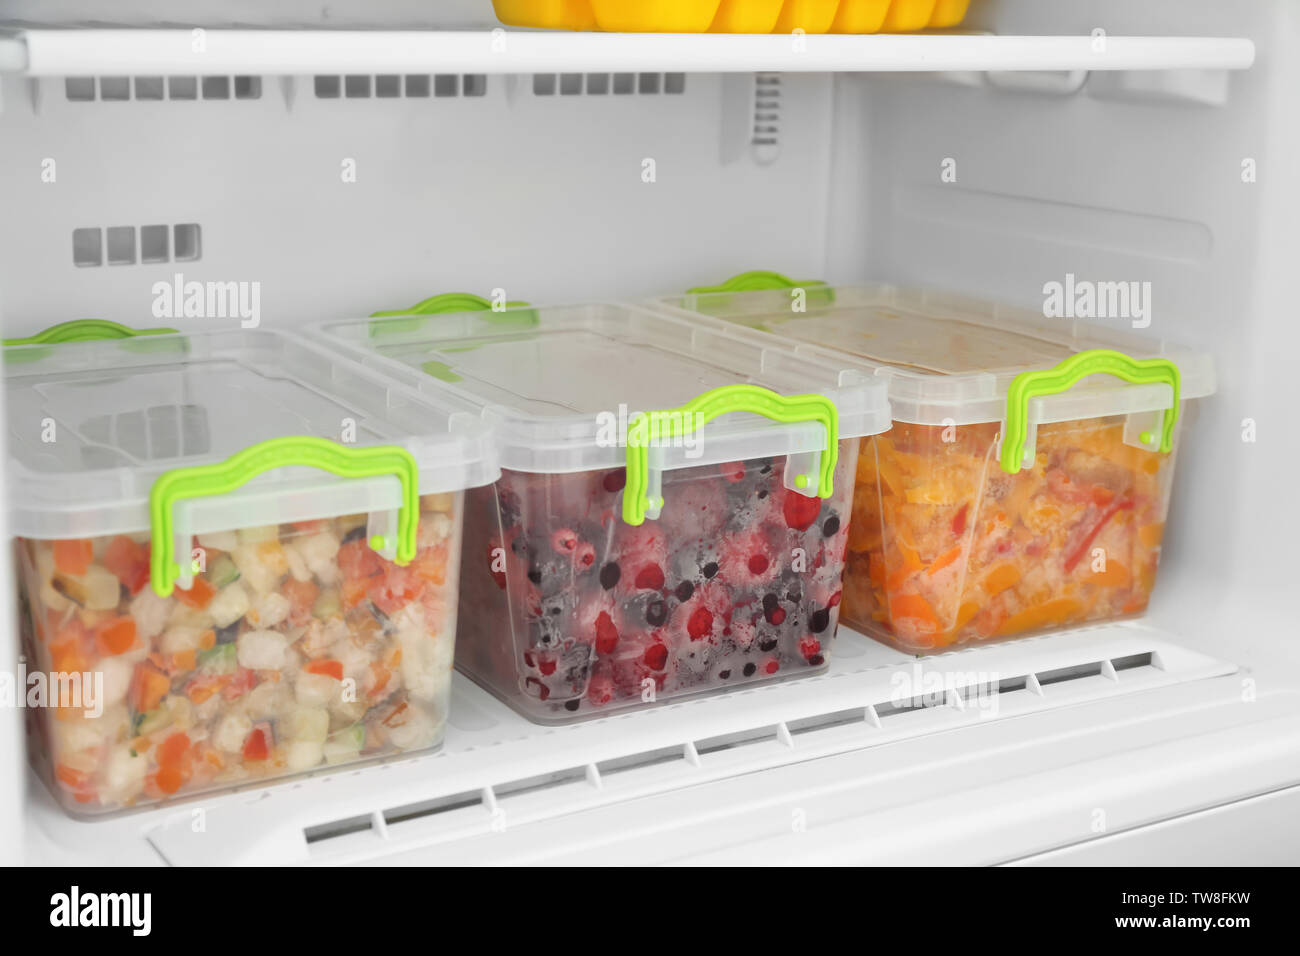 https://c8.alamy.com/comp/TW8FKW/containers-with-frozen-berries-and-vegetables-in-freezer-closeup-TW8FKW.jpg